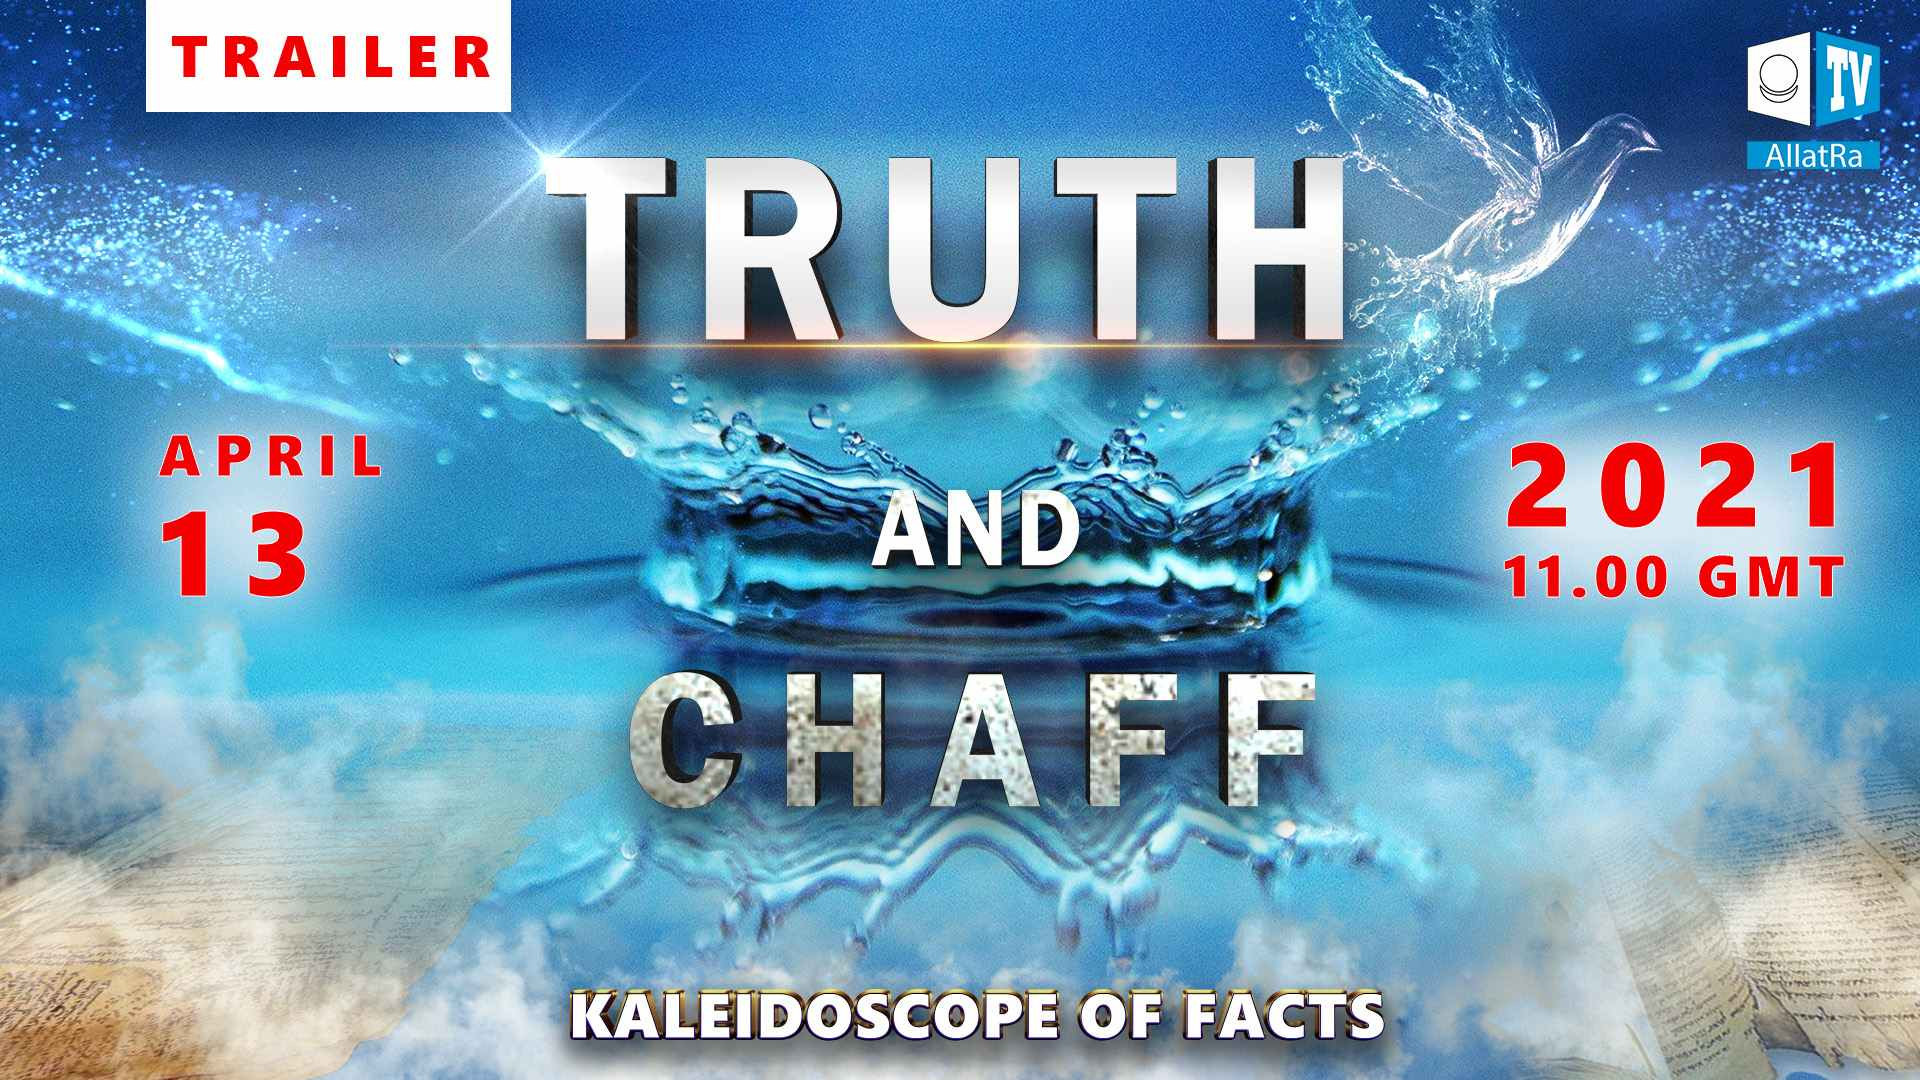 Trailer for Kaleidoscope of Facts "The Truth and Chaff"